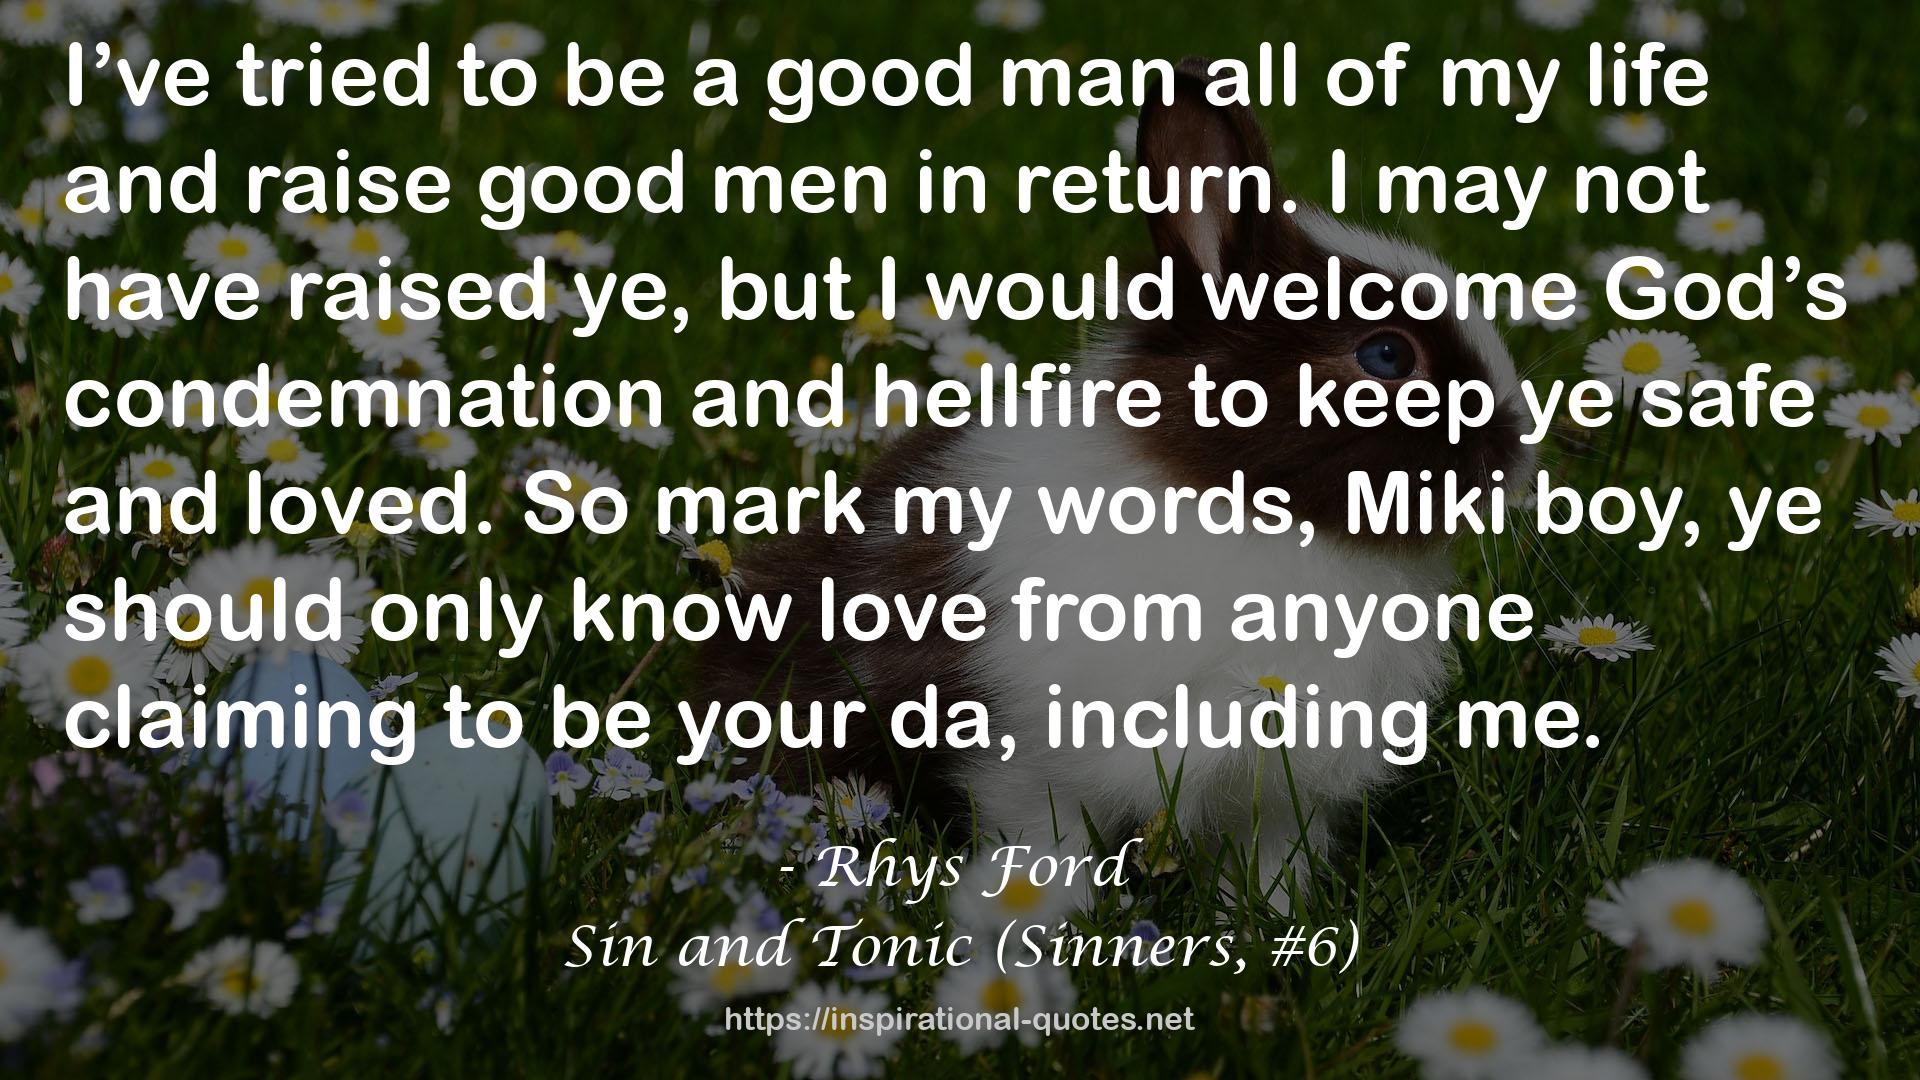 Sin and Tonic (Sinners, #6) QUOTES